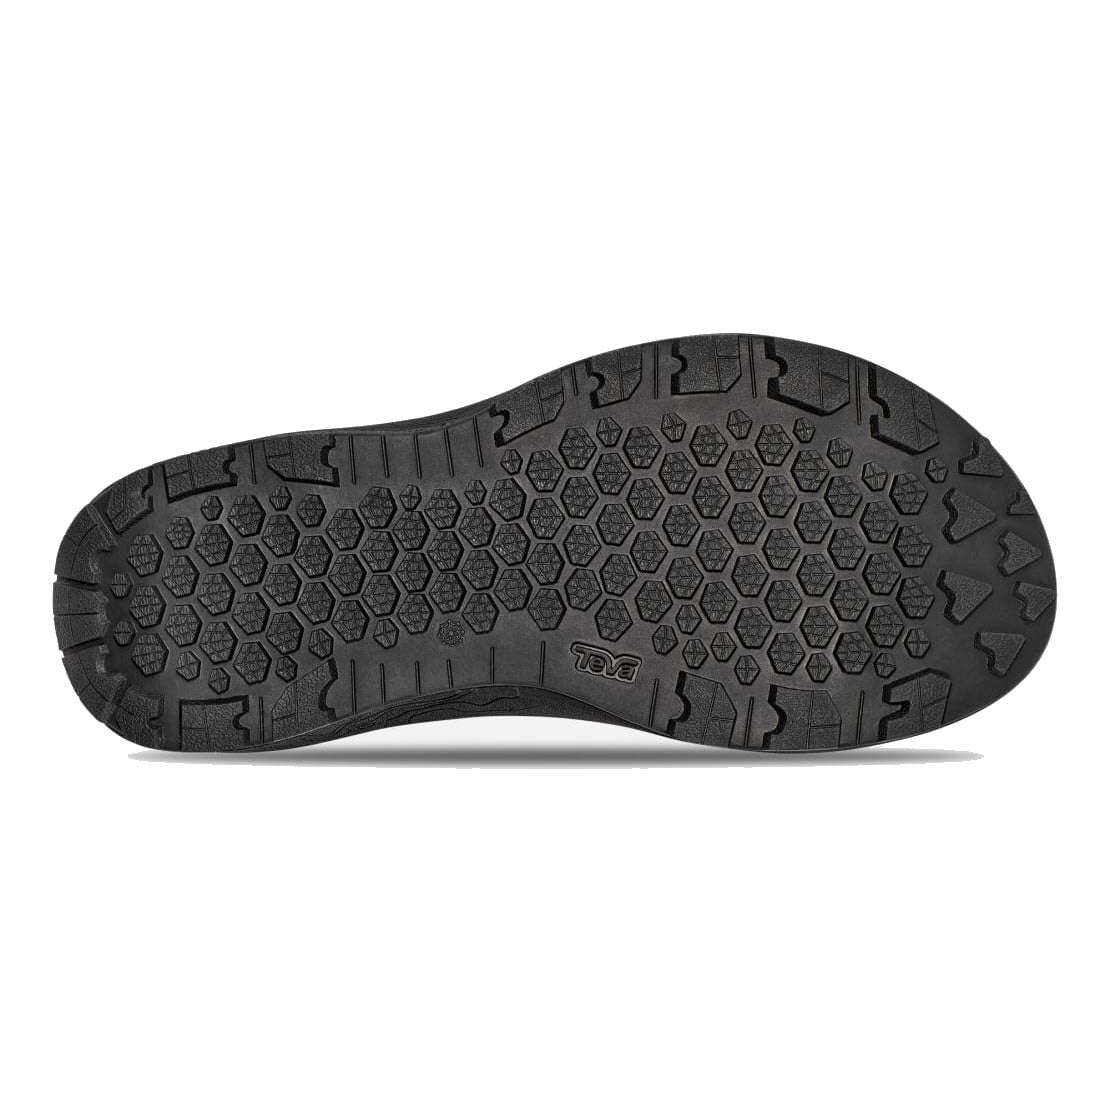 Bottom view of a black Teva TerraGrip Sandal sole with a detailed tread pattern designed for traction.